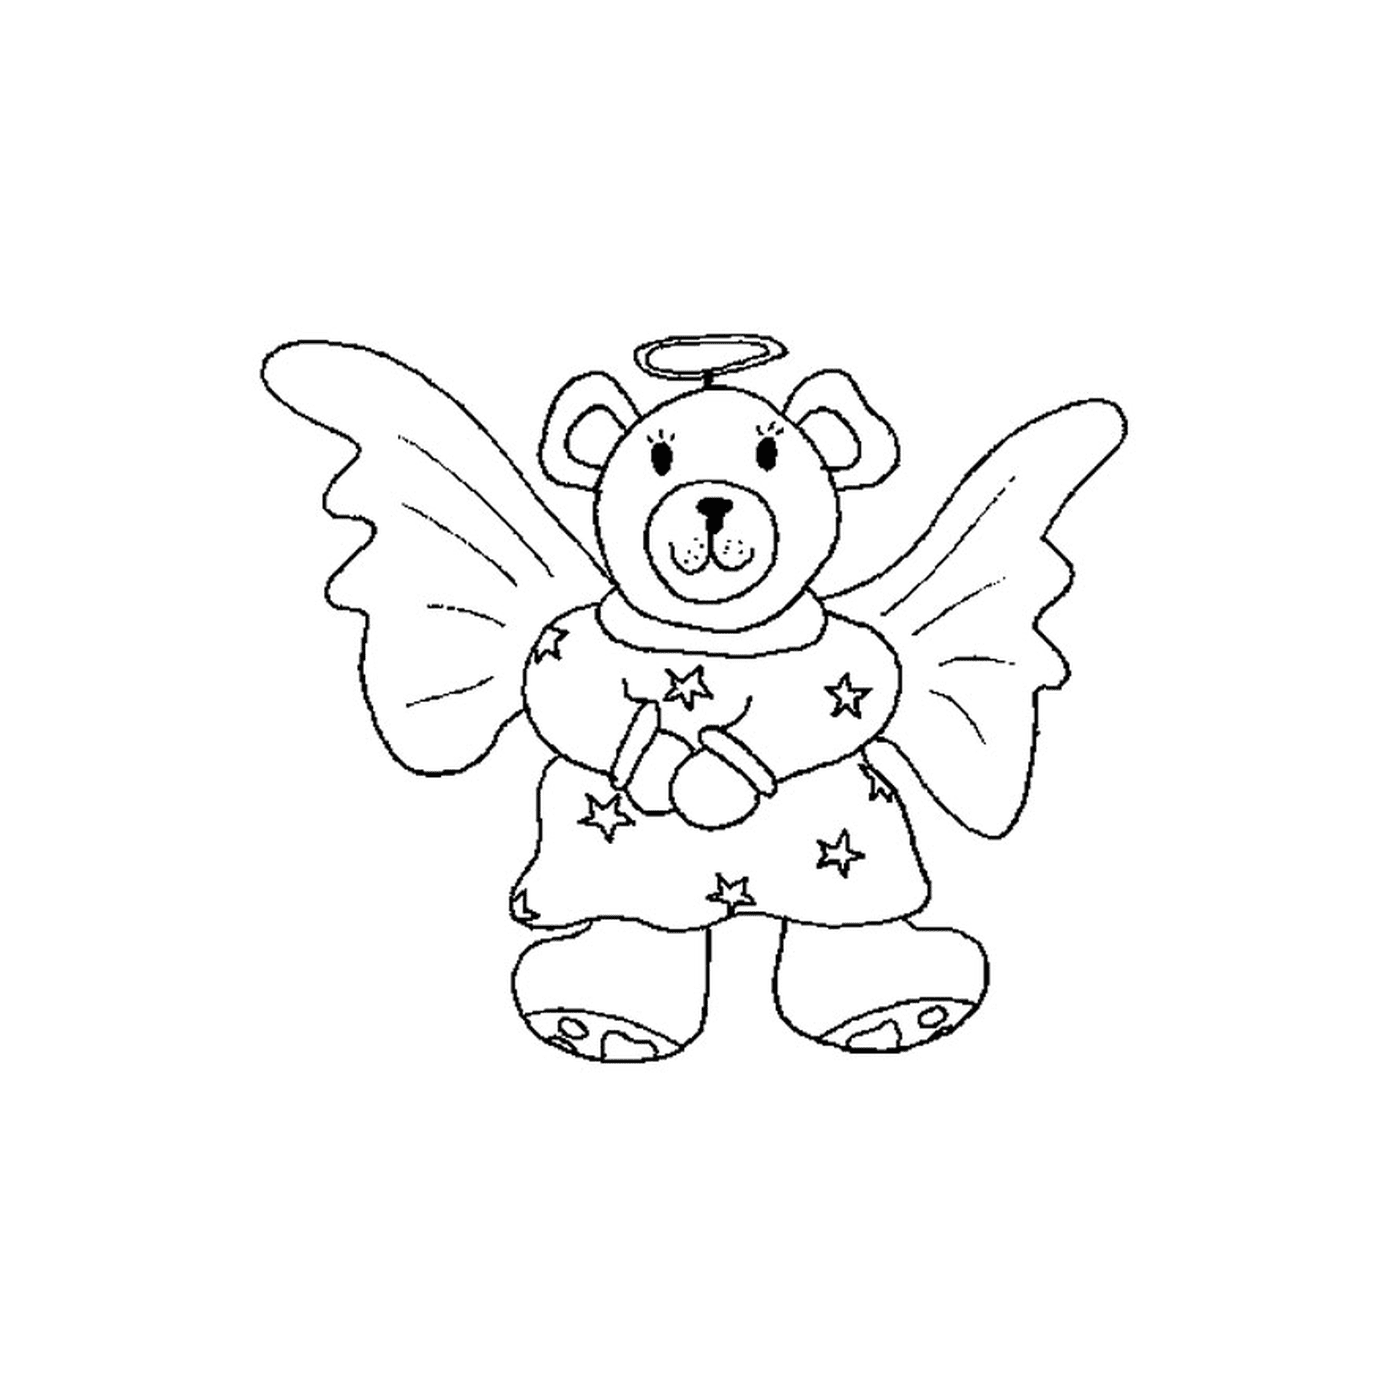  Bears with wings and halos 